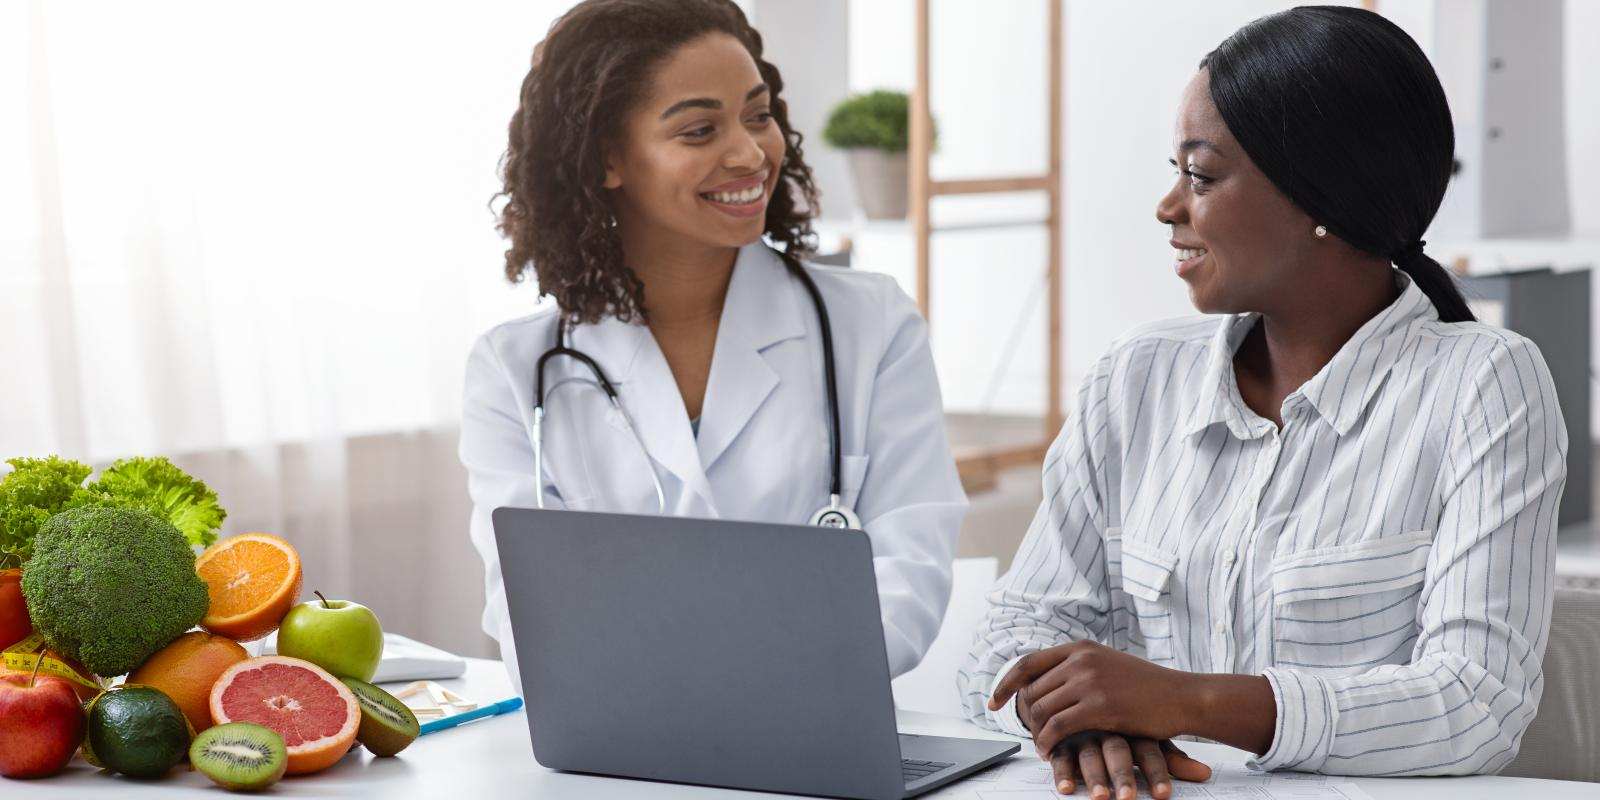 Smiling black lady doctor chatting with female patient